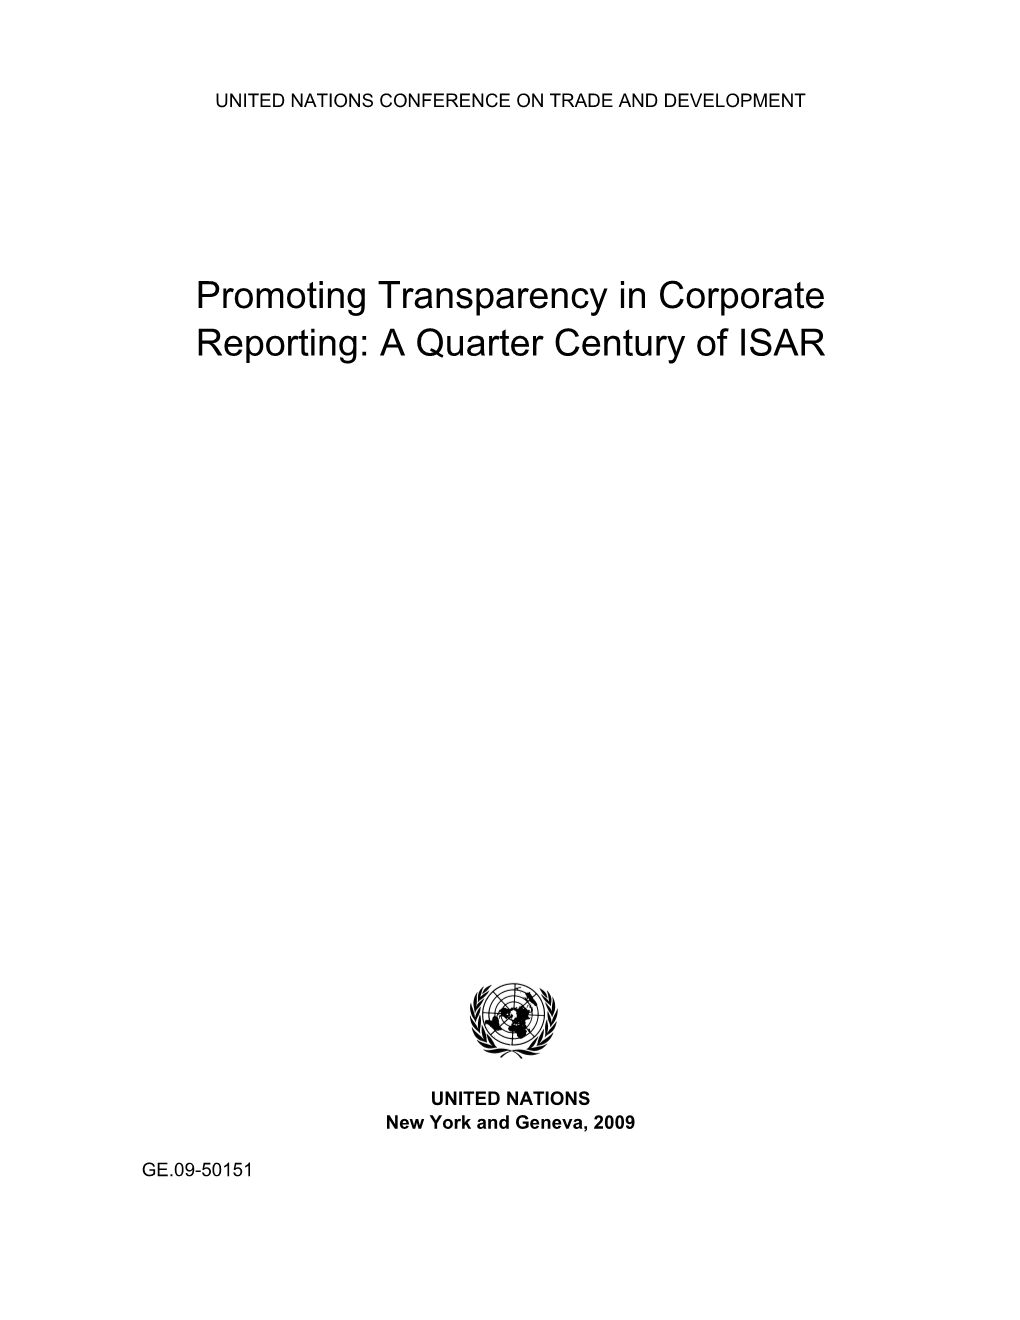 Promoting Transparency in Corporate Reporting: a Quarter Century of ISAR